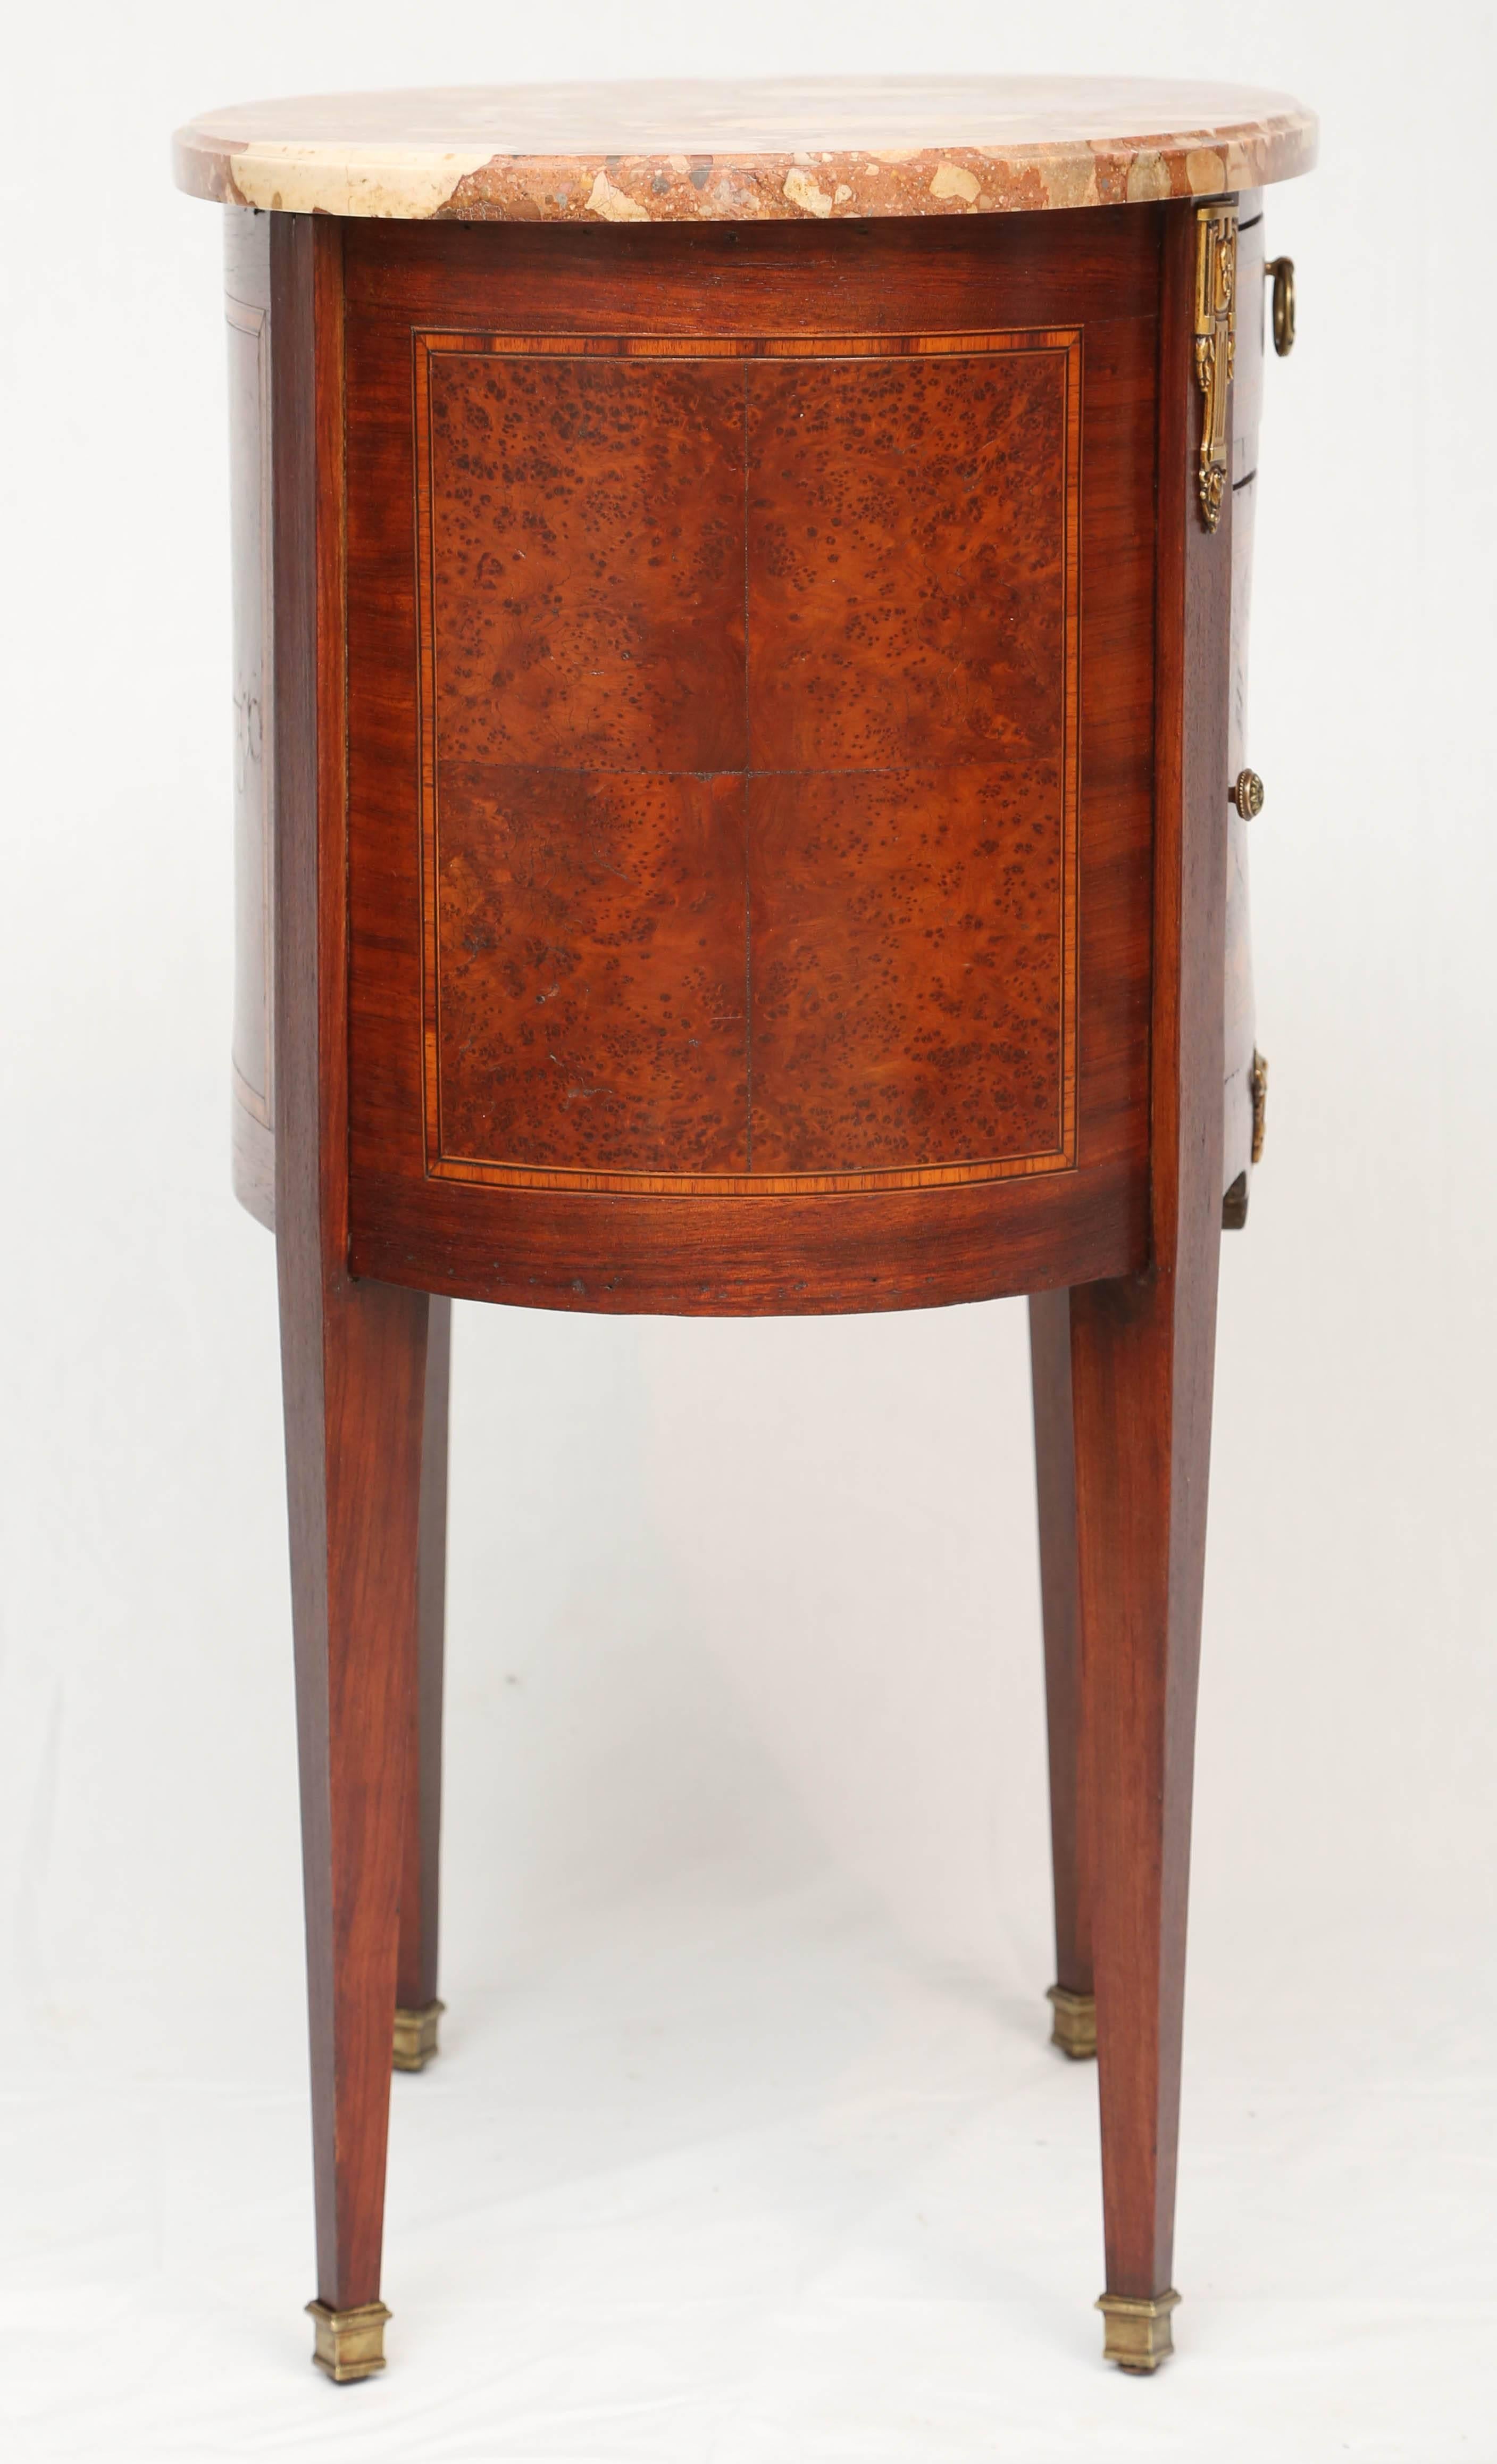 19th Century Inlaid and Parquetry French Commode with Marble Top For Sale 3